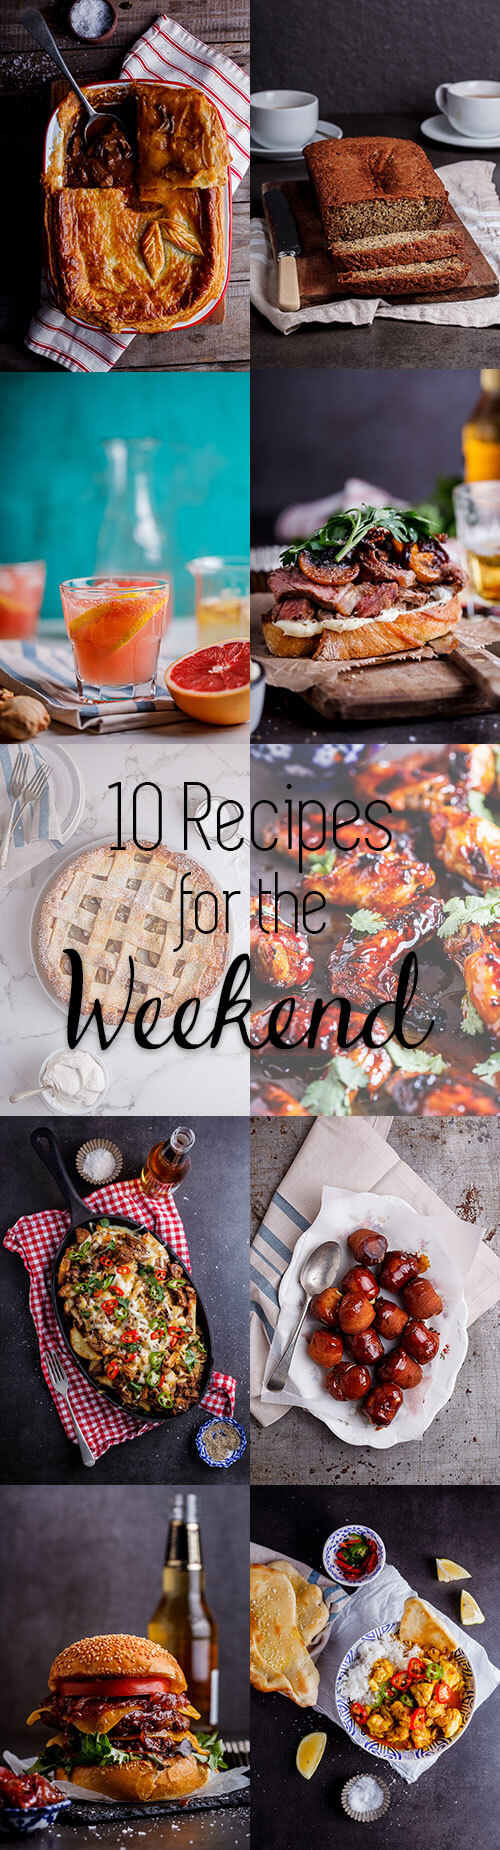 10 Recipes for the weekend